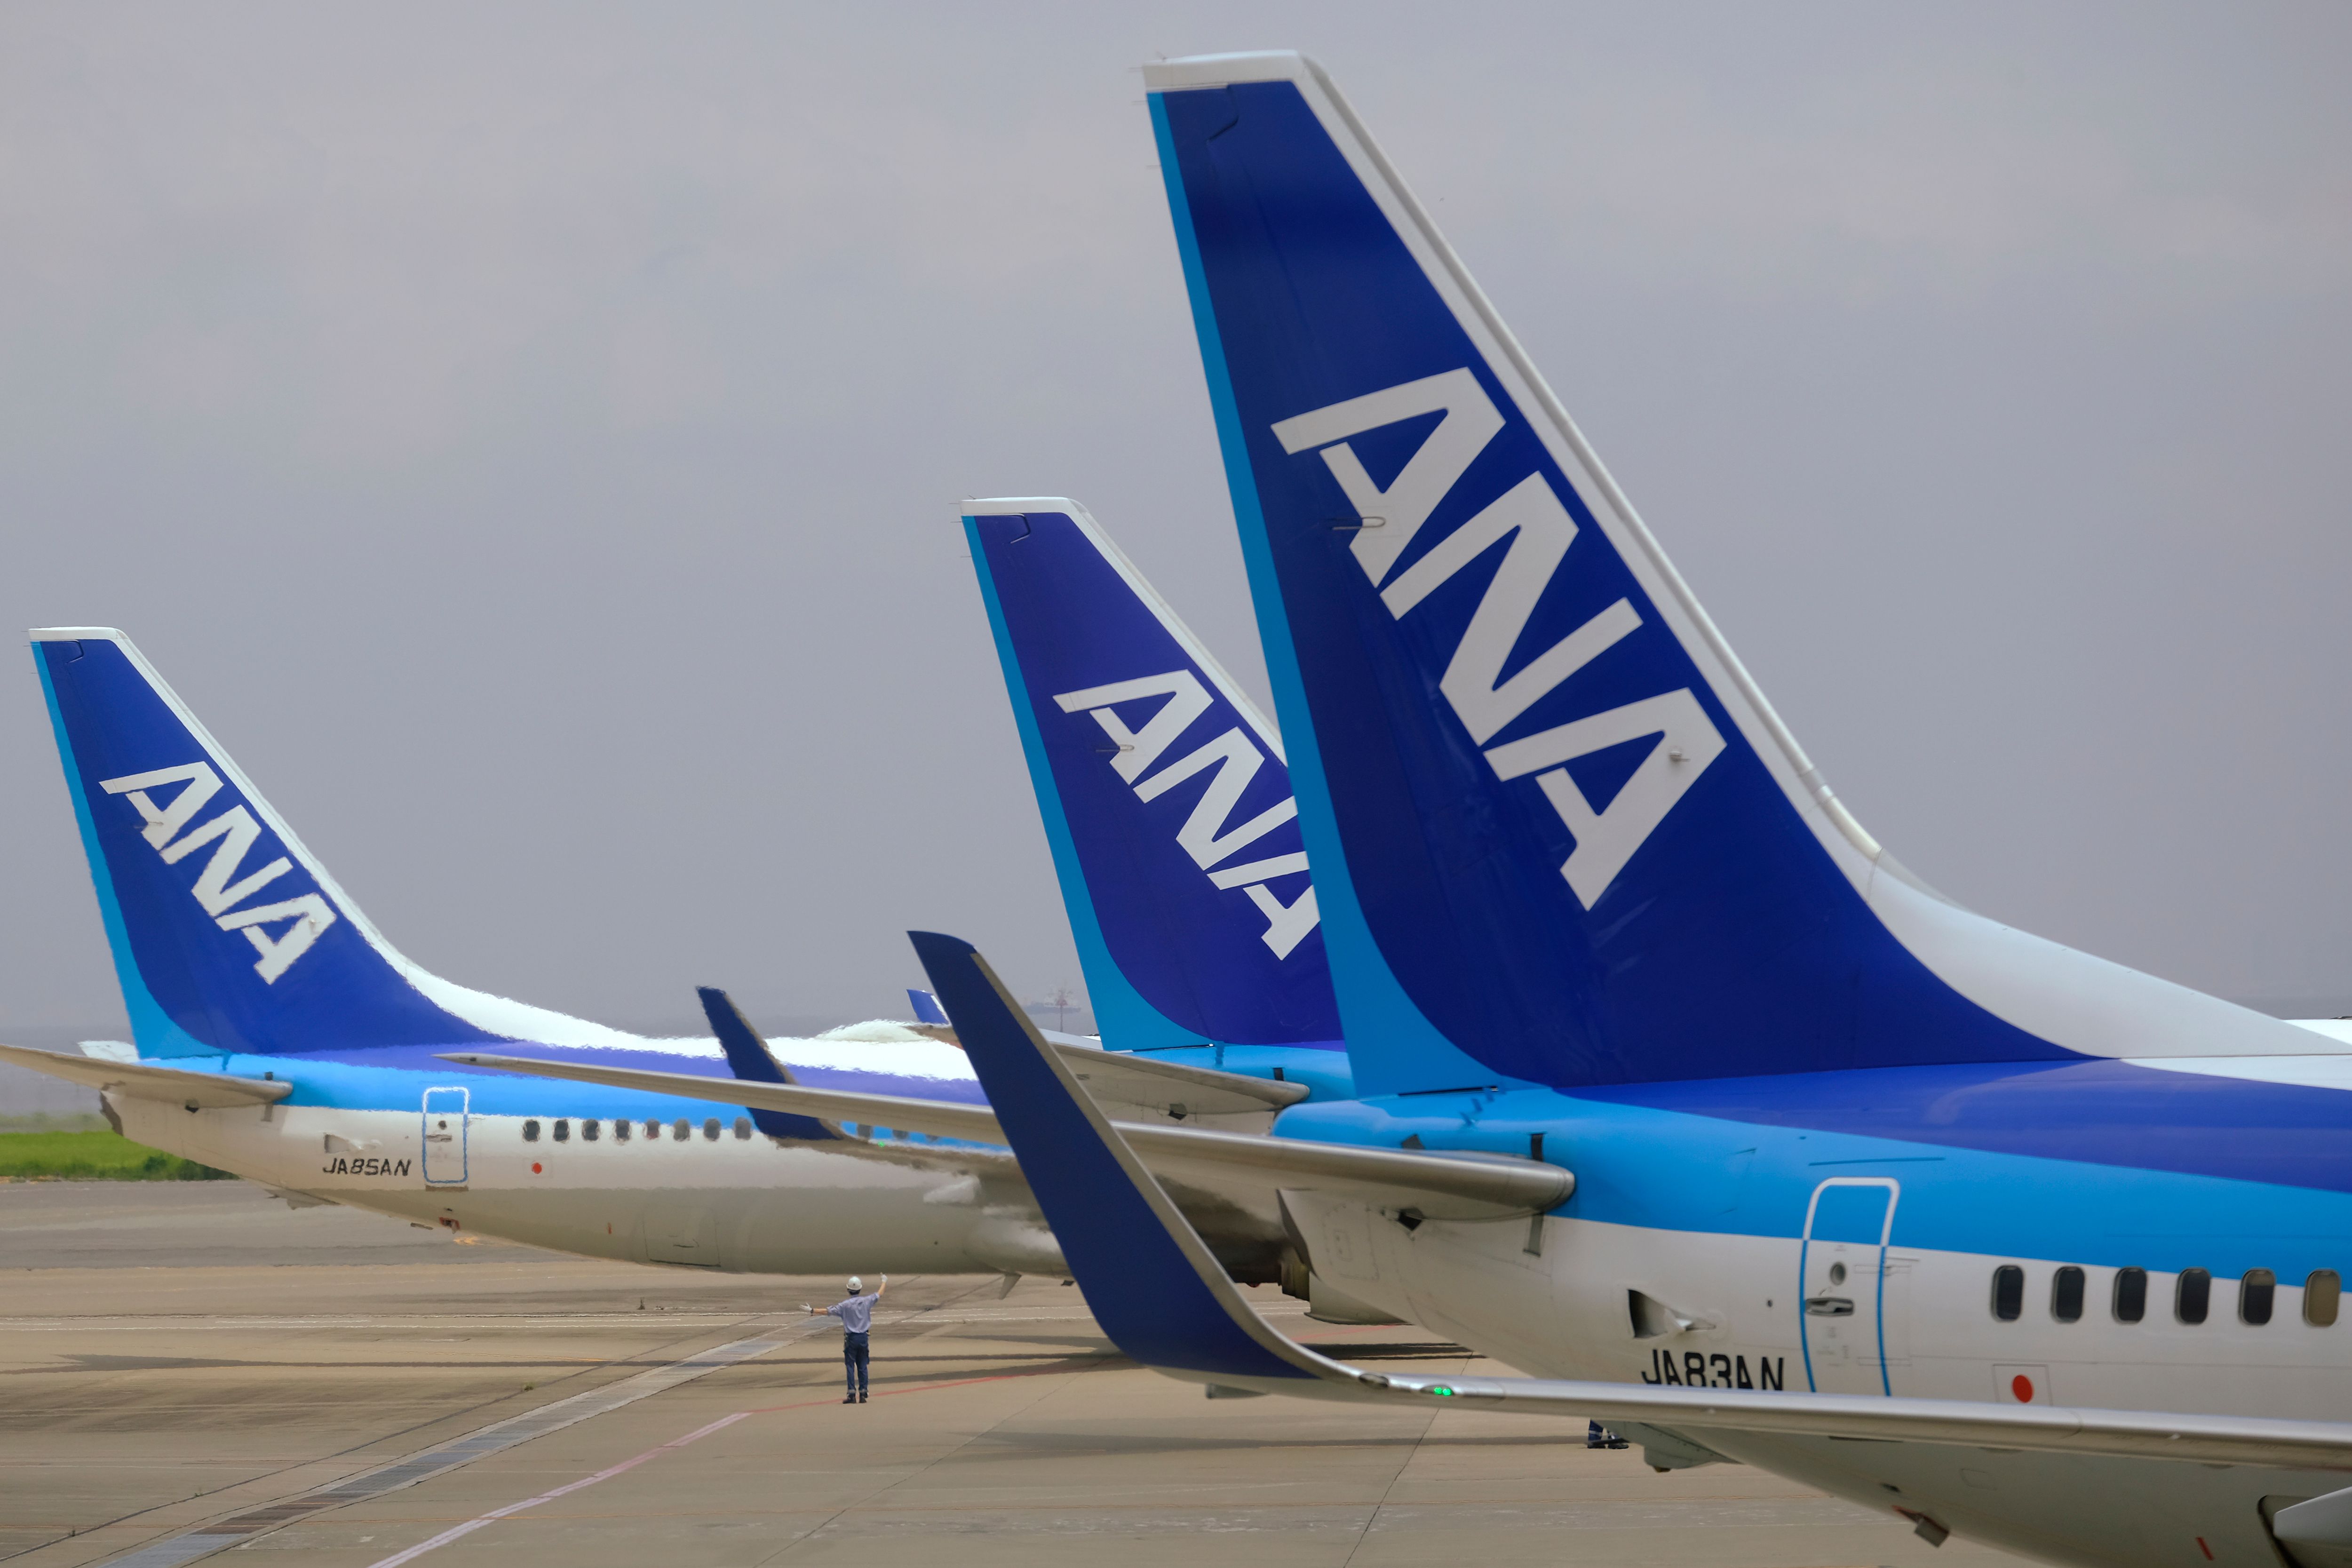 ANA aircraft tails lined up 